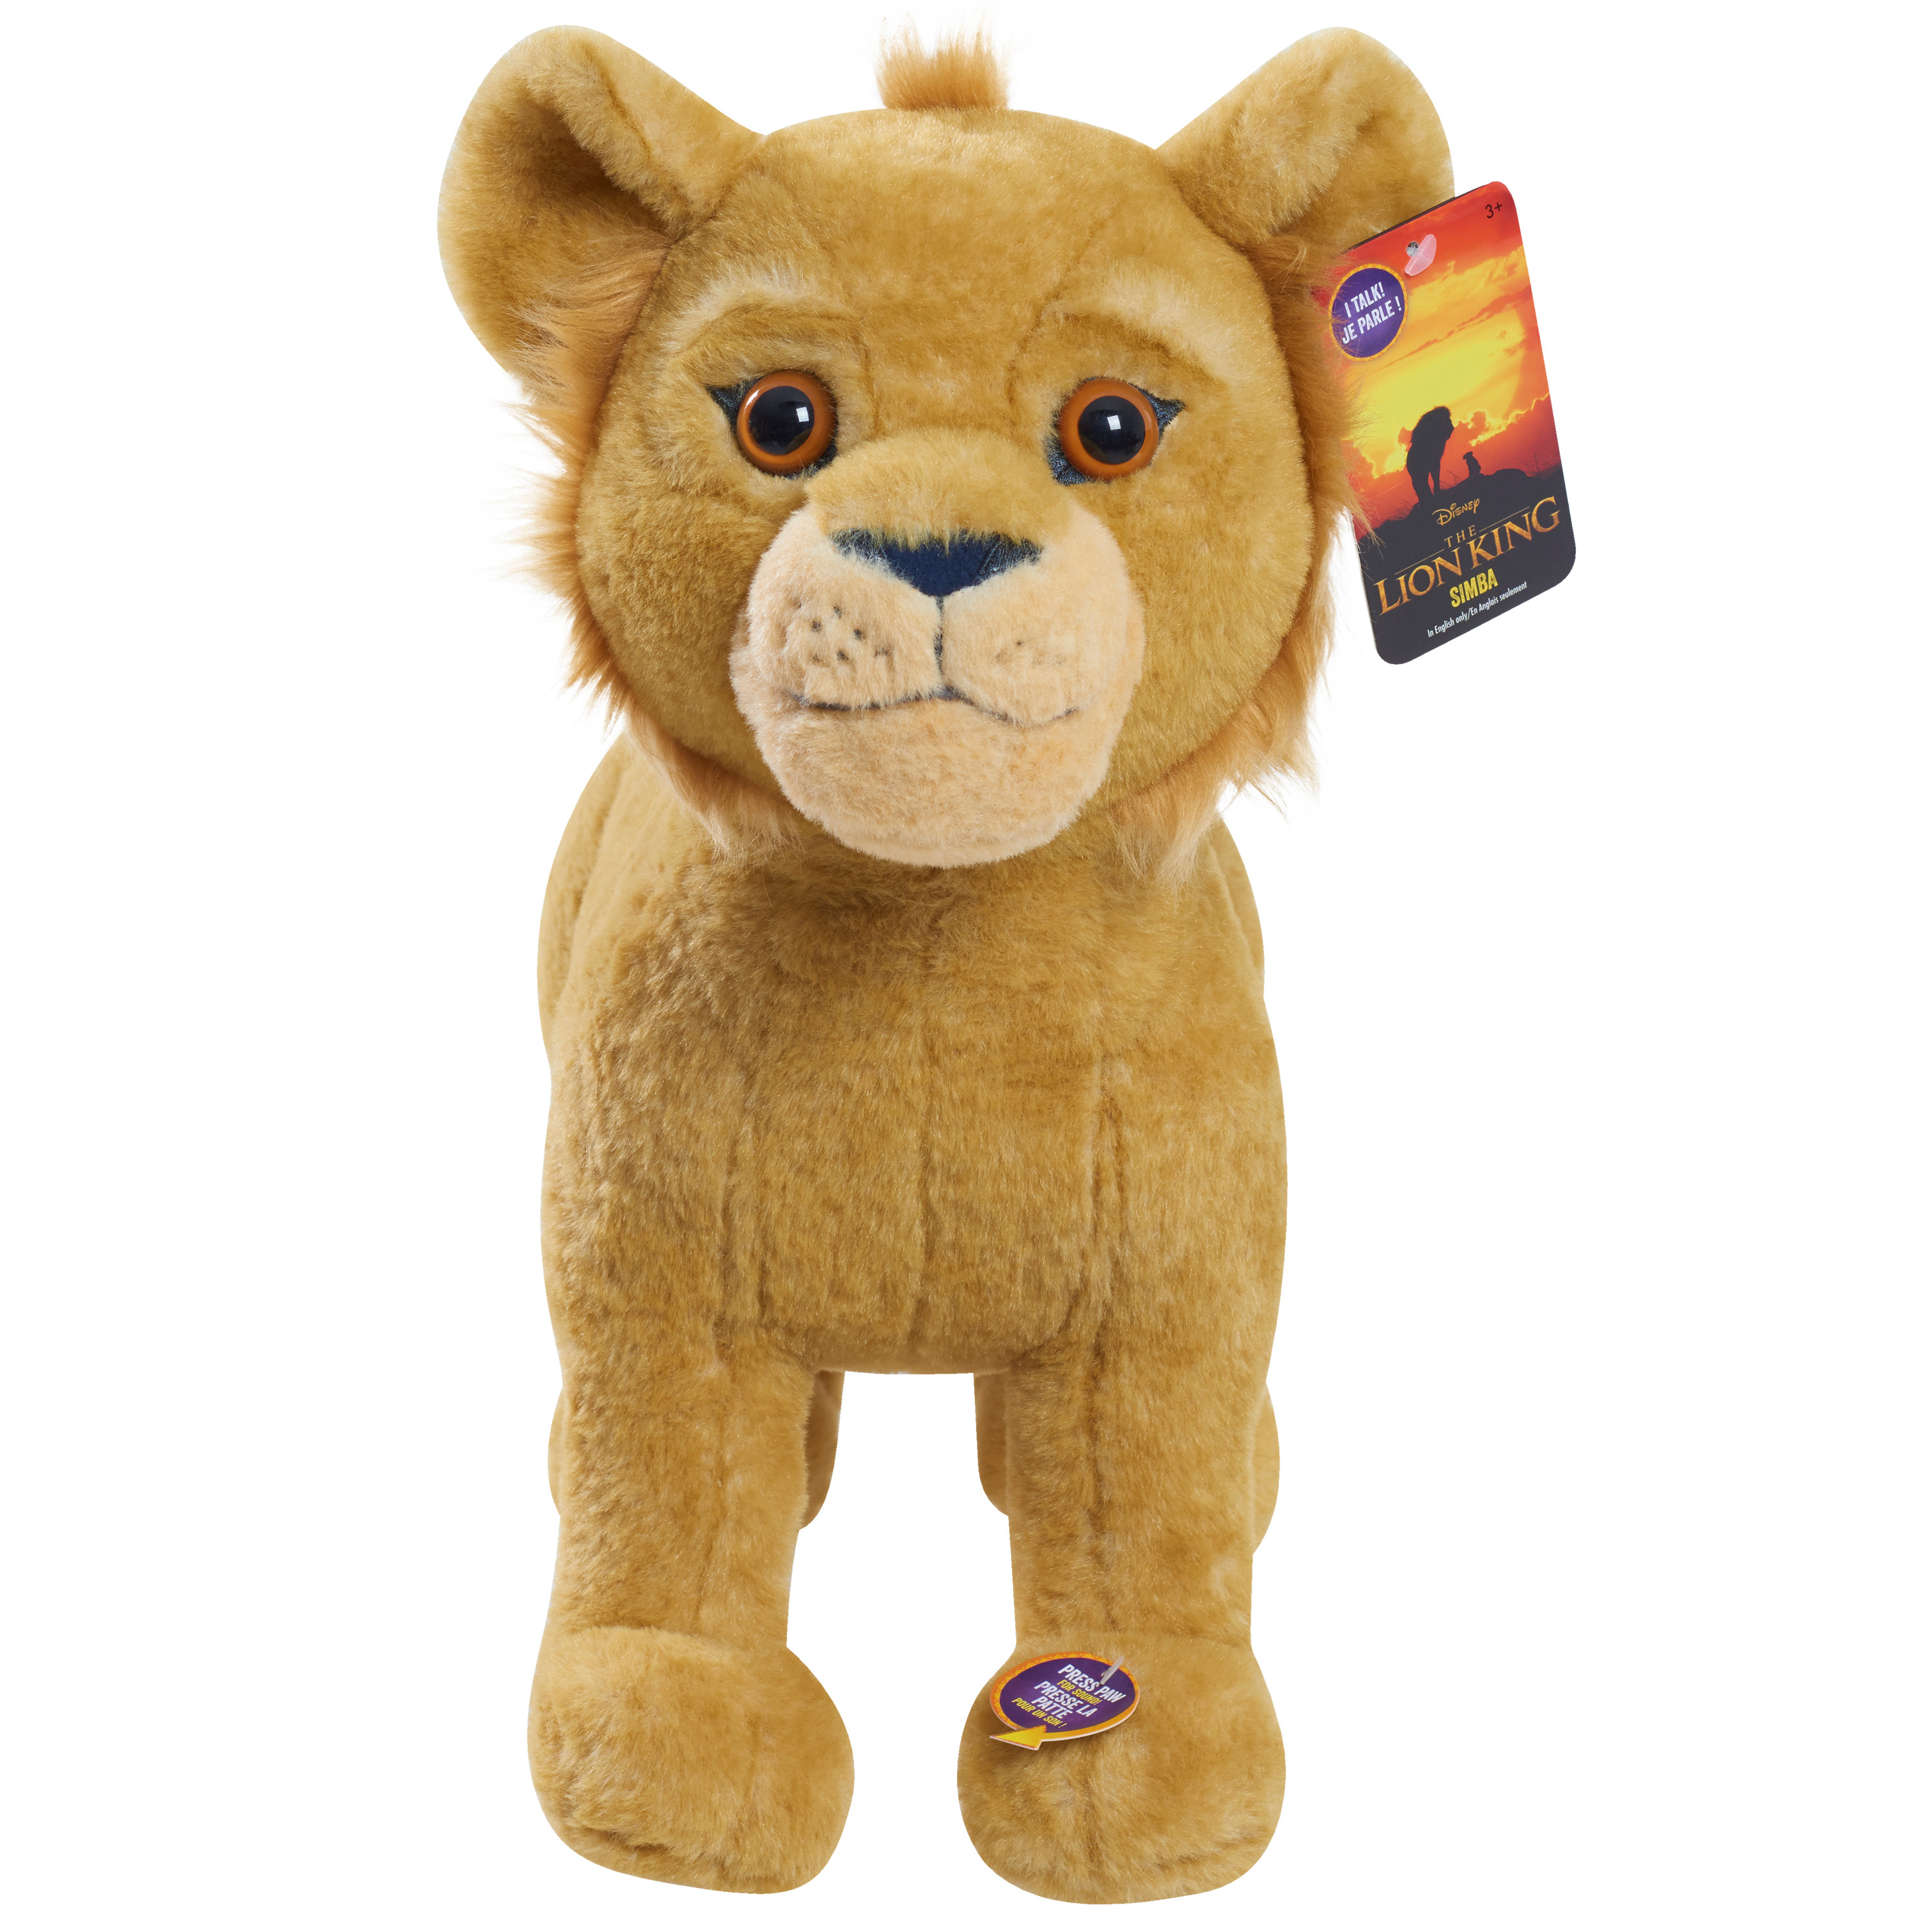 Disney's The Lion King Large Plush Simba, Stuffed Animal, Lion, Officially Licensed Kids Toys for Ages 3 Up, Gifts and Presents - image 4 of 4